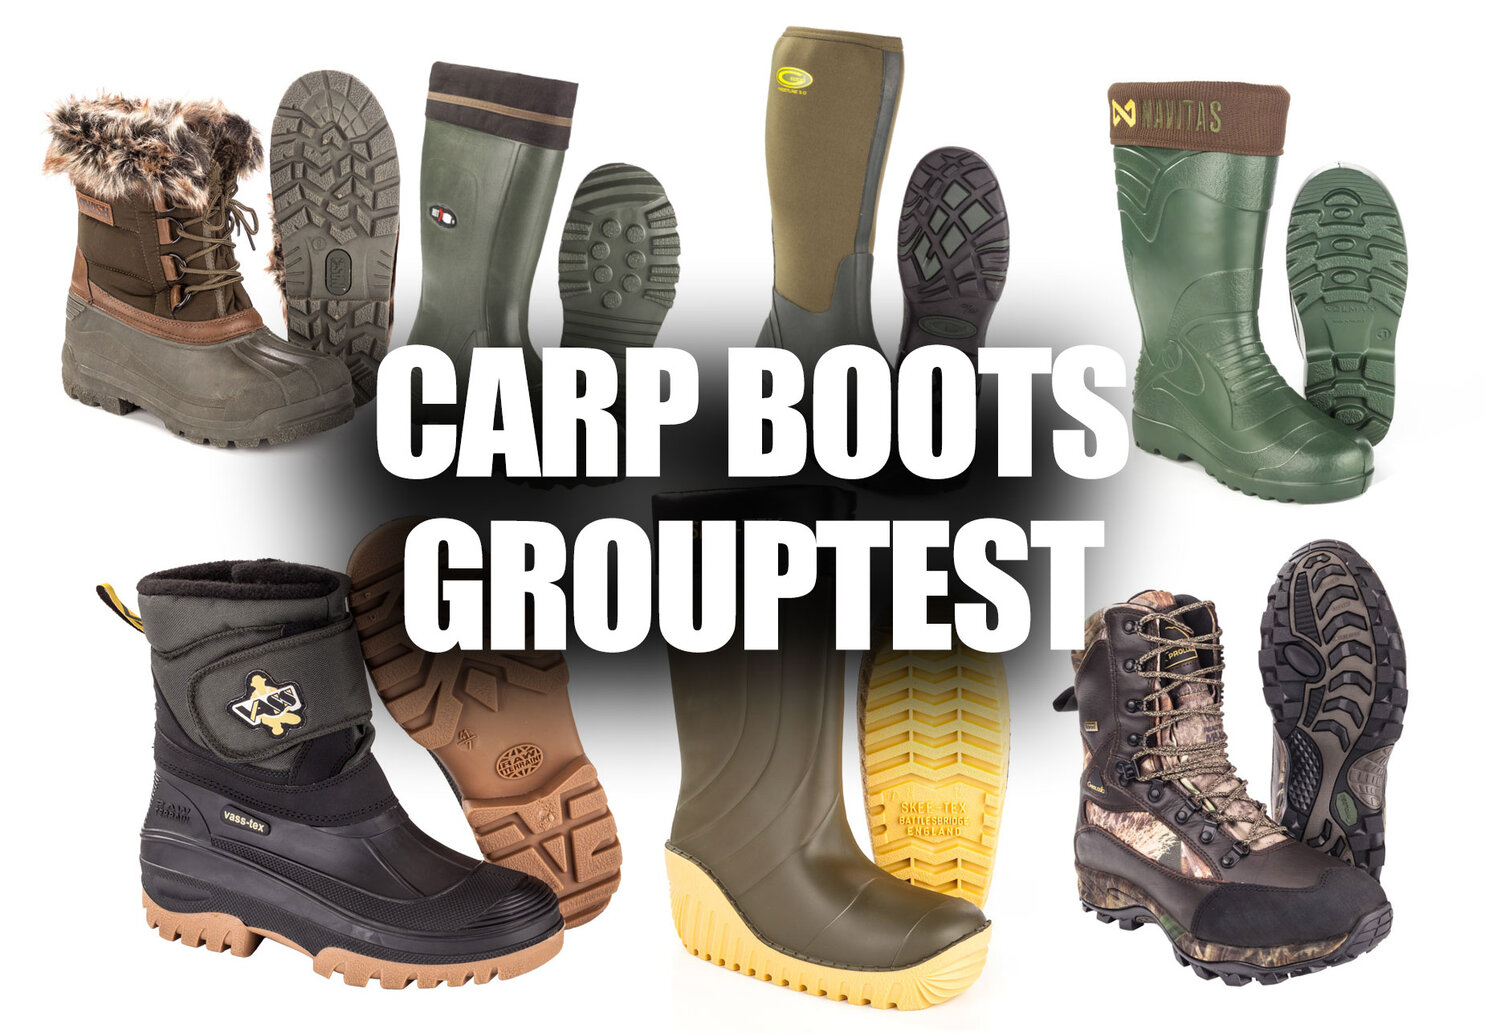 Navitas Boots Mid Top Hybrid Boot Shoes *All Sizes* NEW Carp Fishing Clothing